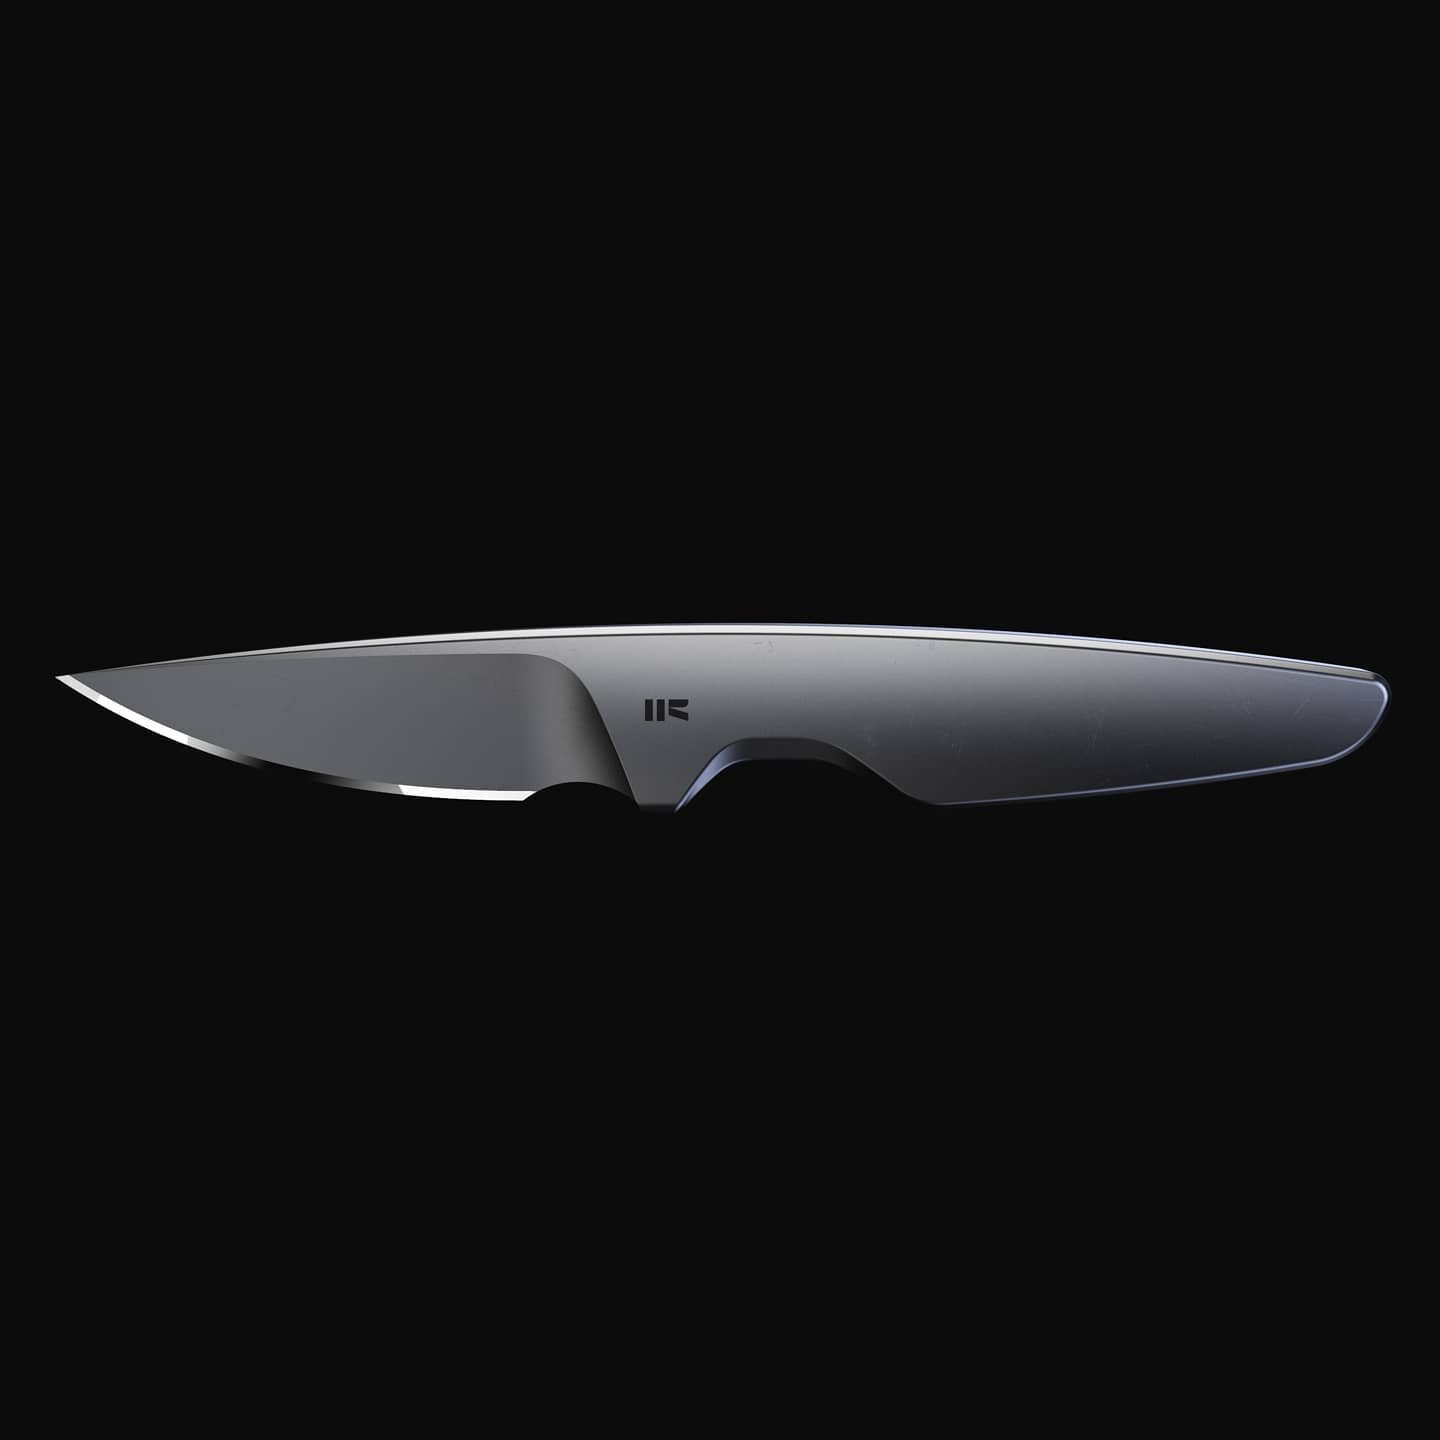 Refined one of the knives from a few days ago